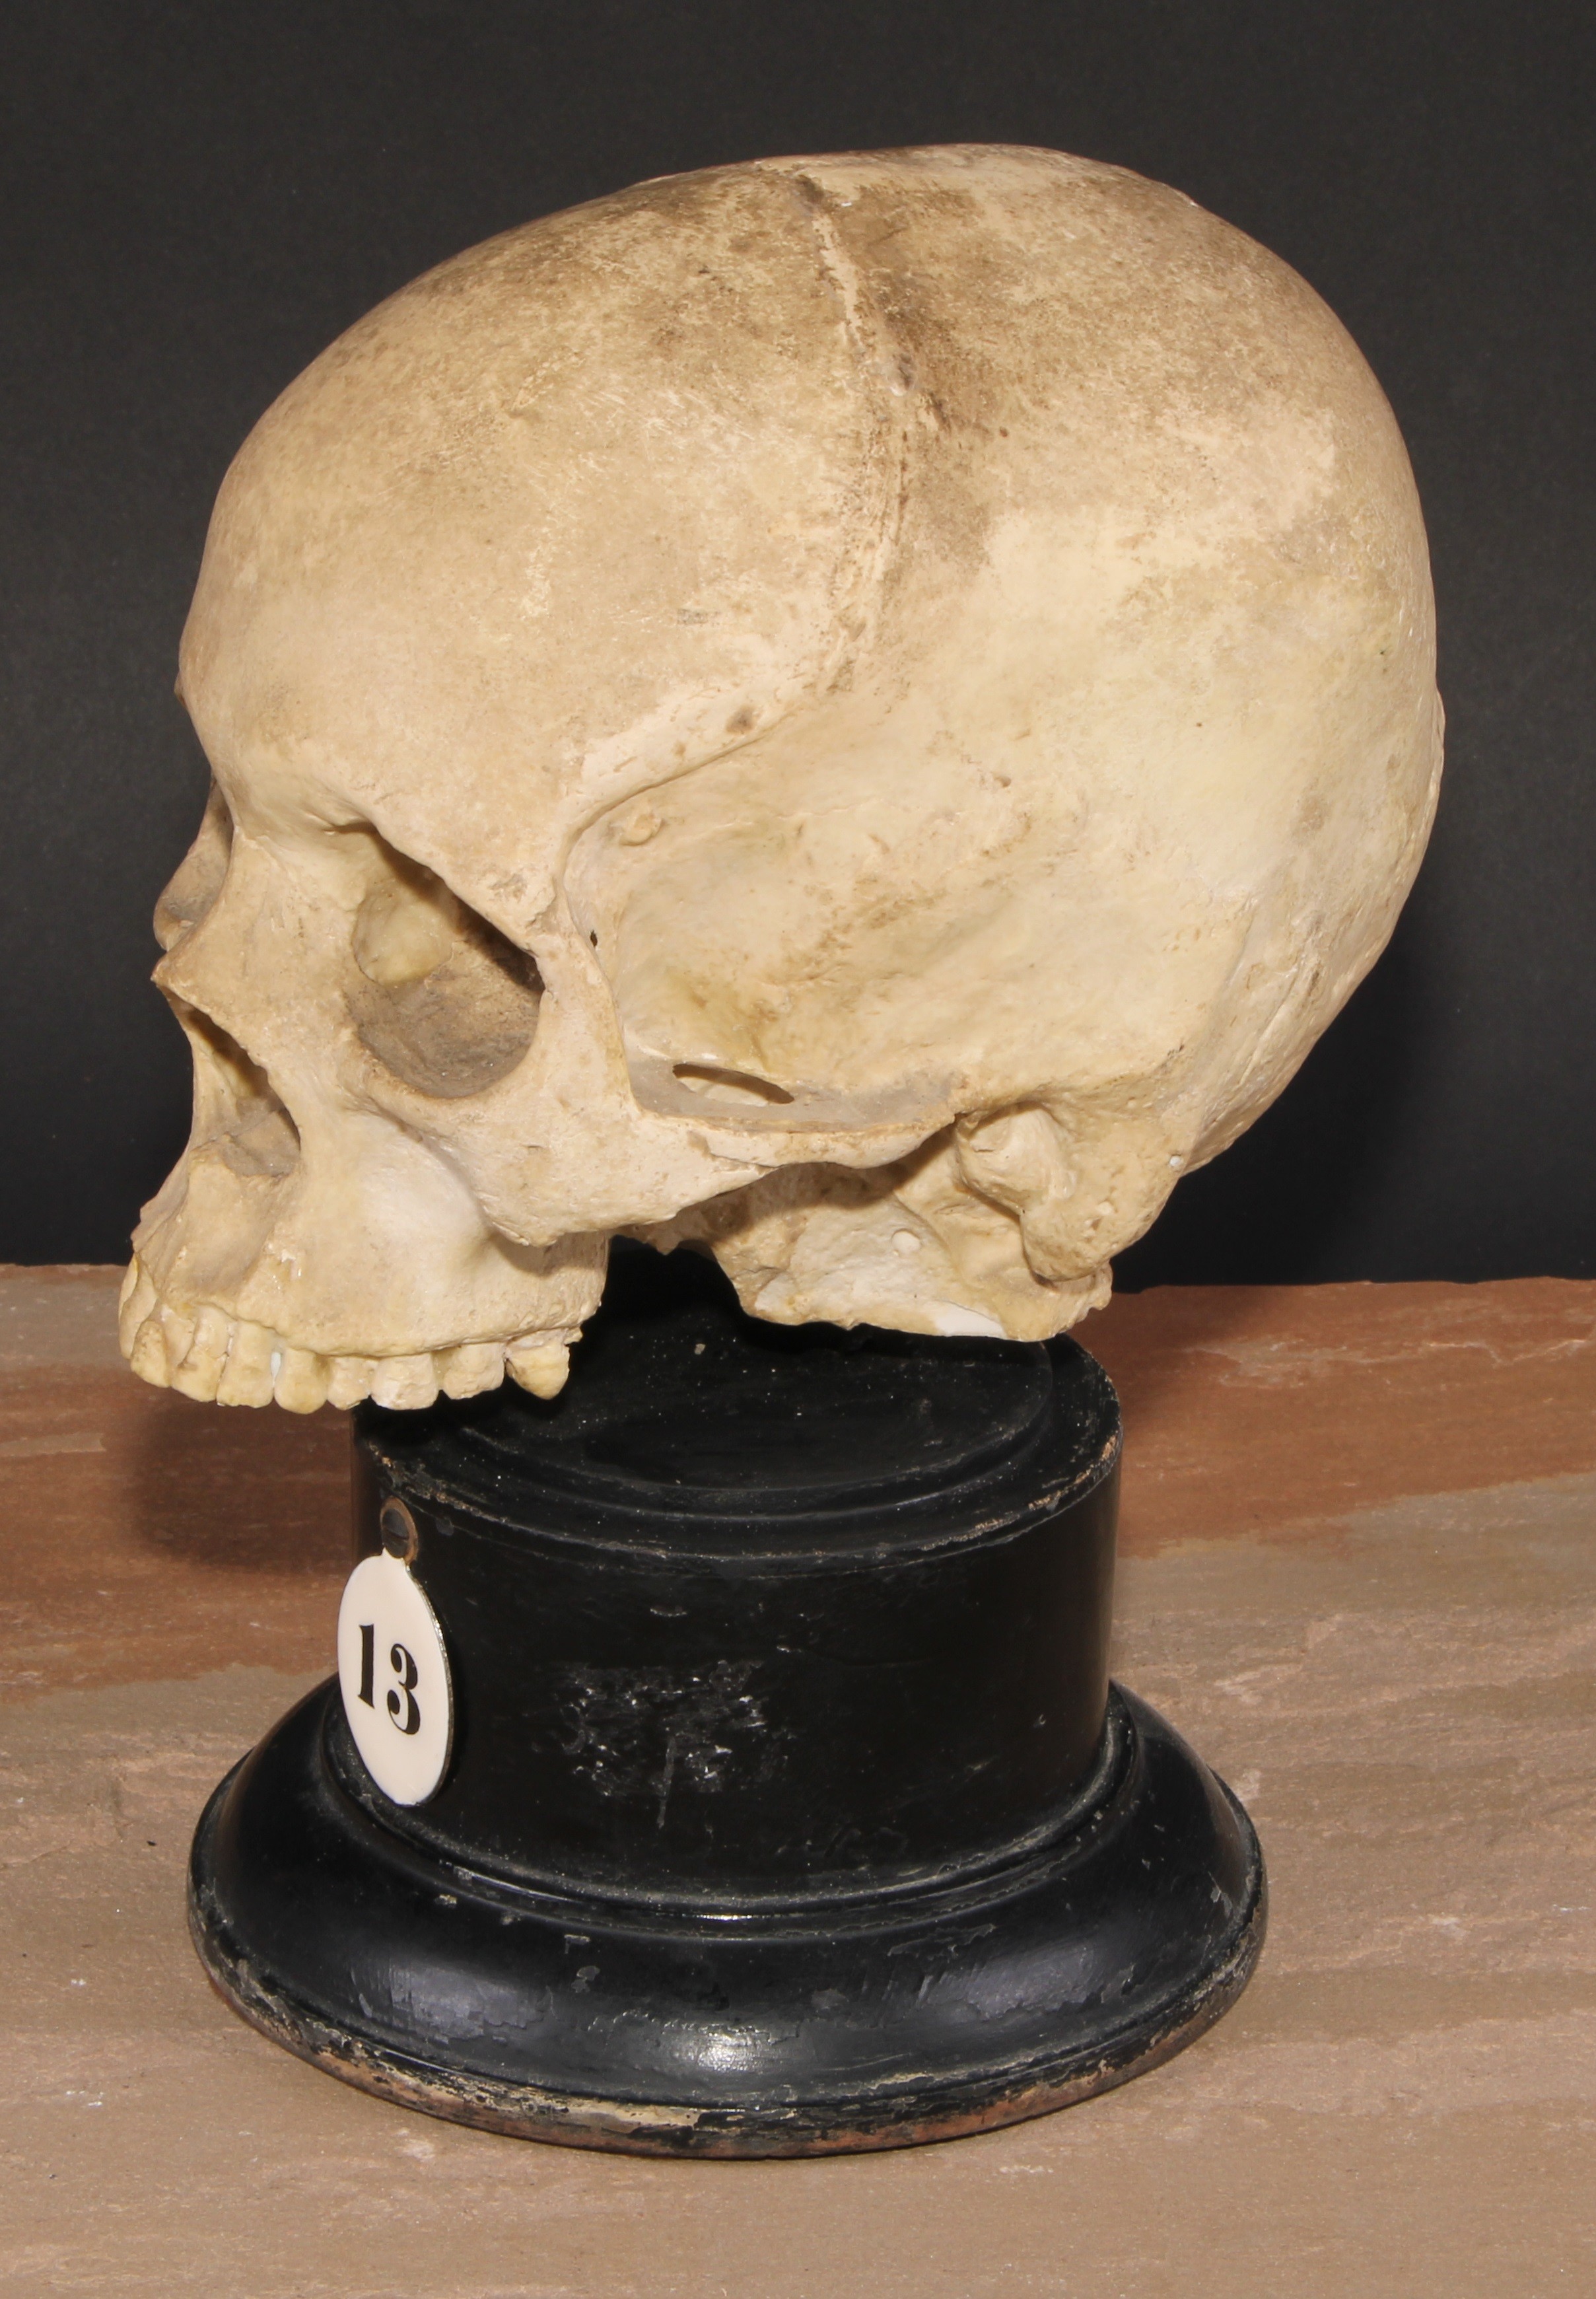 Medical - Anatomy - an early 20th century doctor's plaster anatomical model, of a human skull, - Image 2 of 3